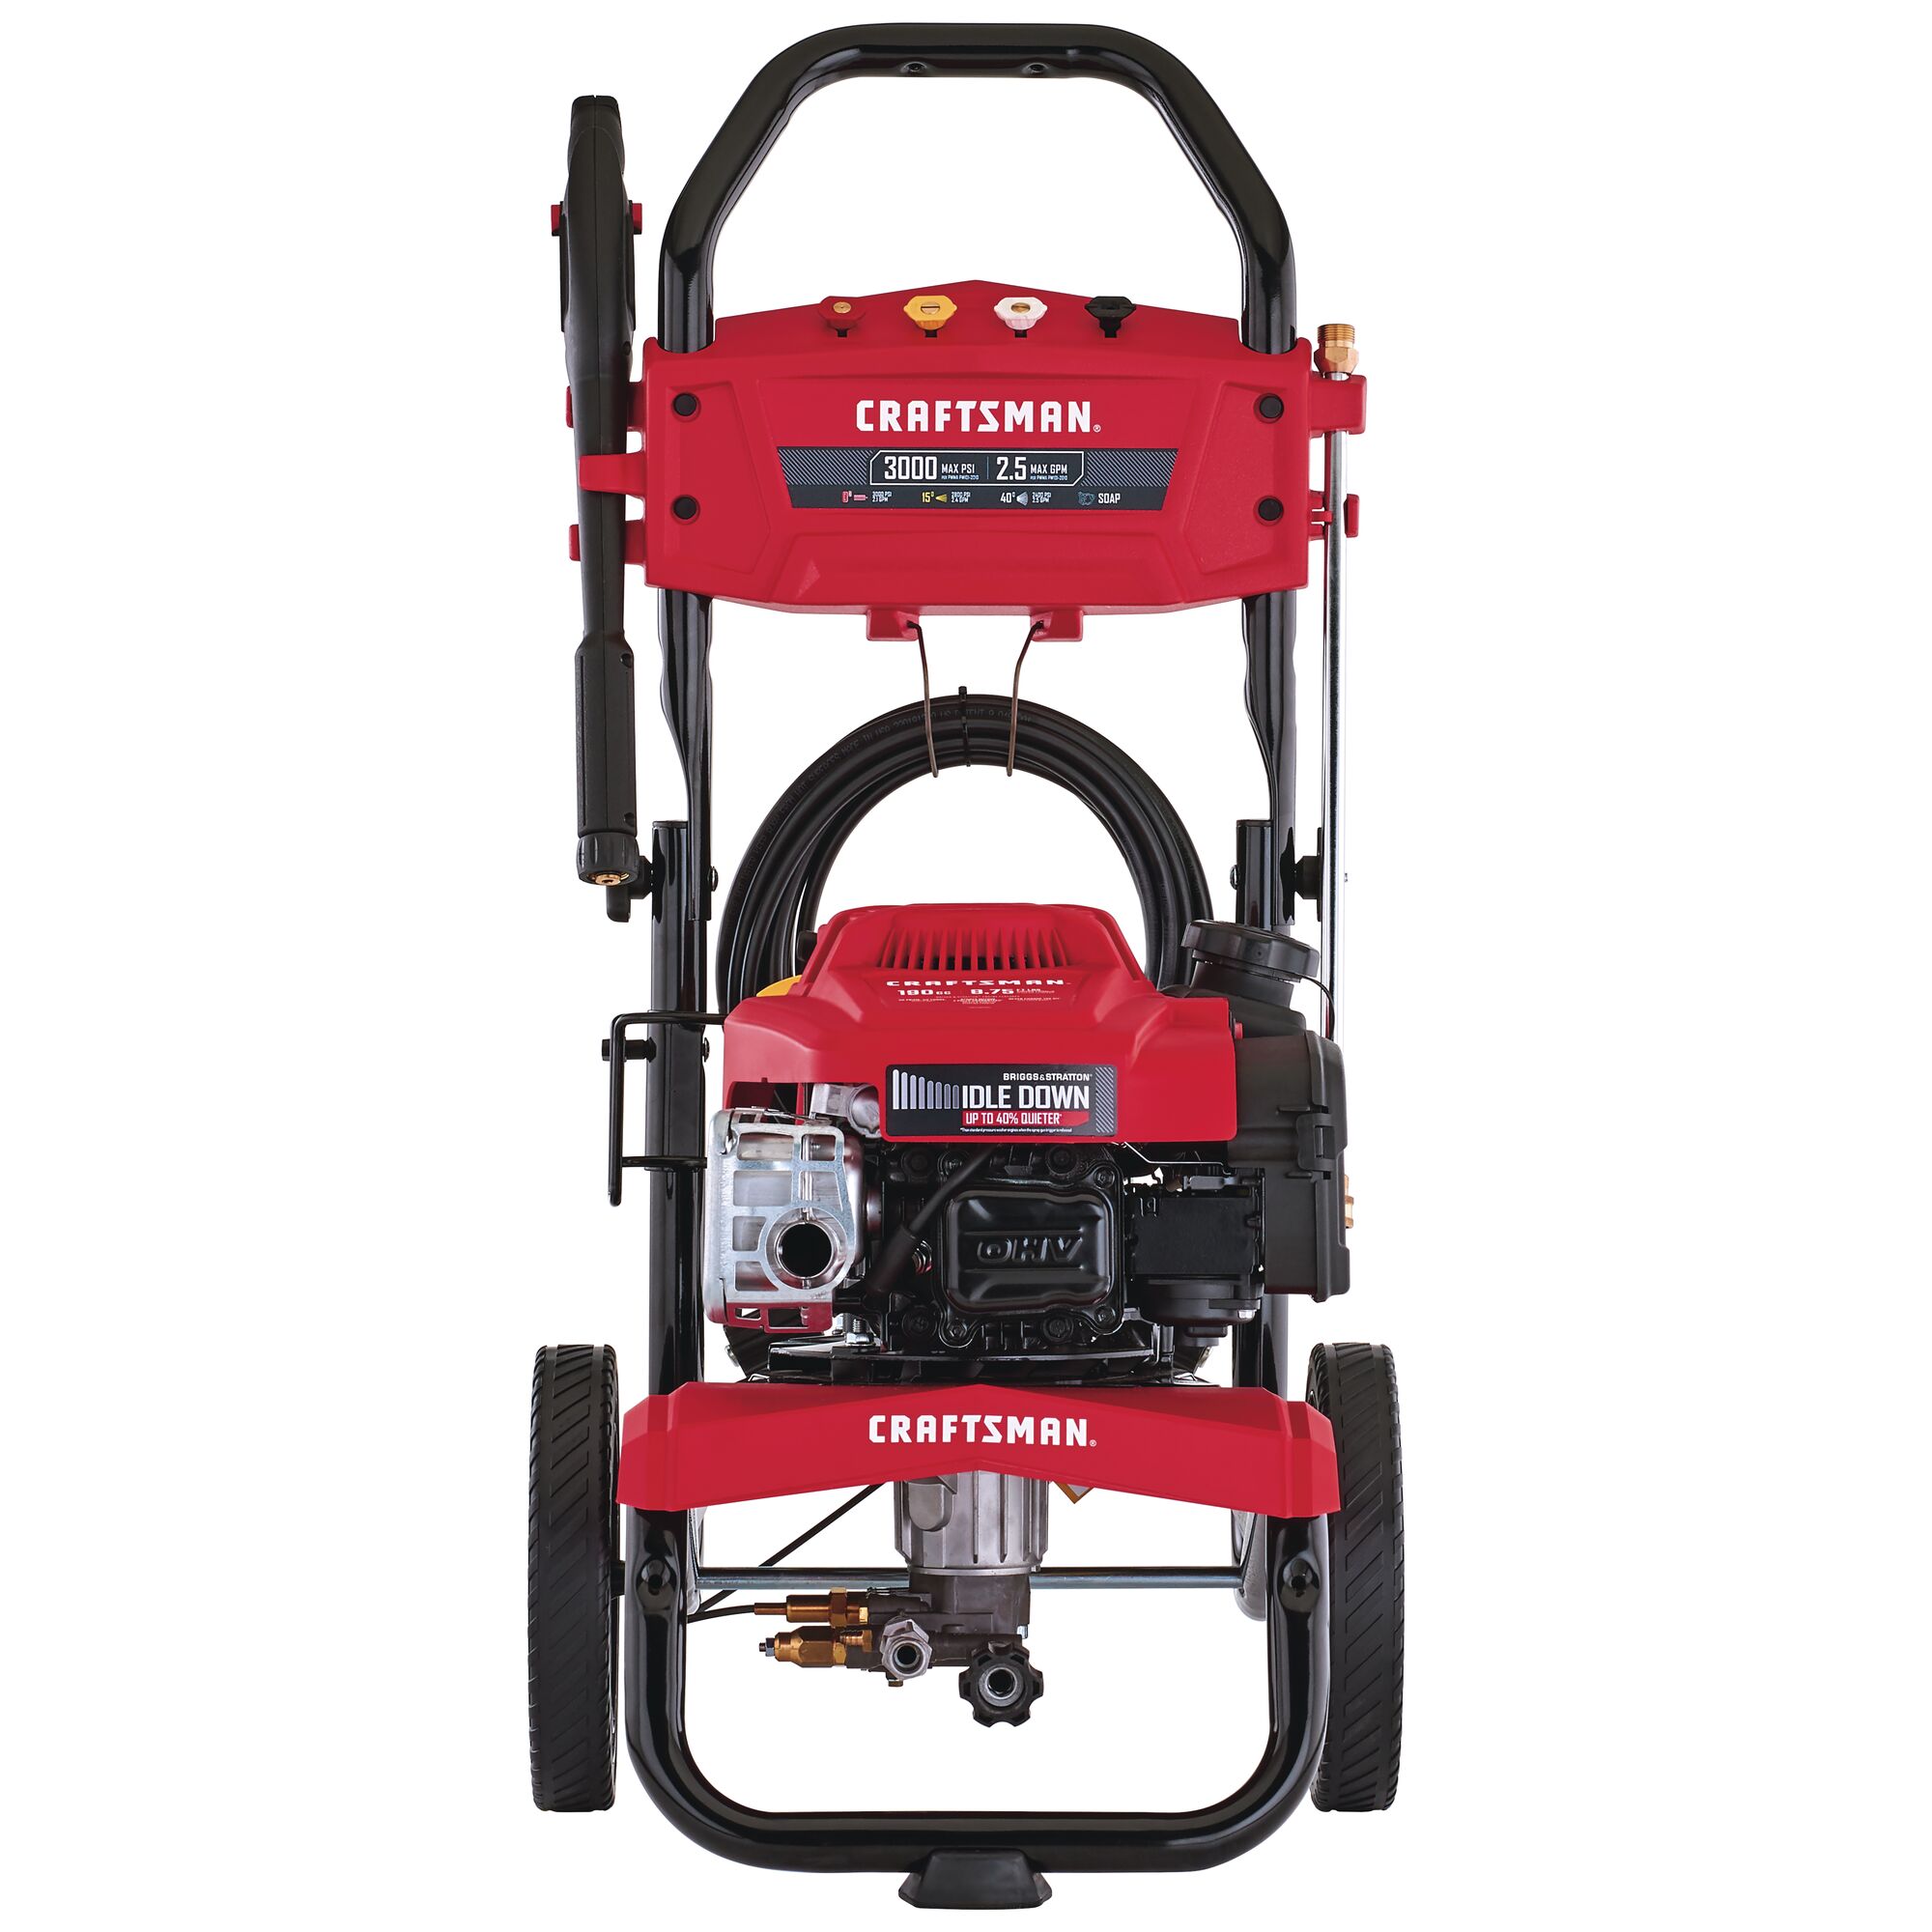 3000 MAX Pounds per Square Inch or 2 and five tenths MAX Gallons Per Minute Pressure Washer.